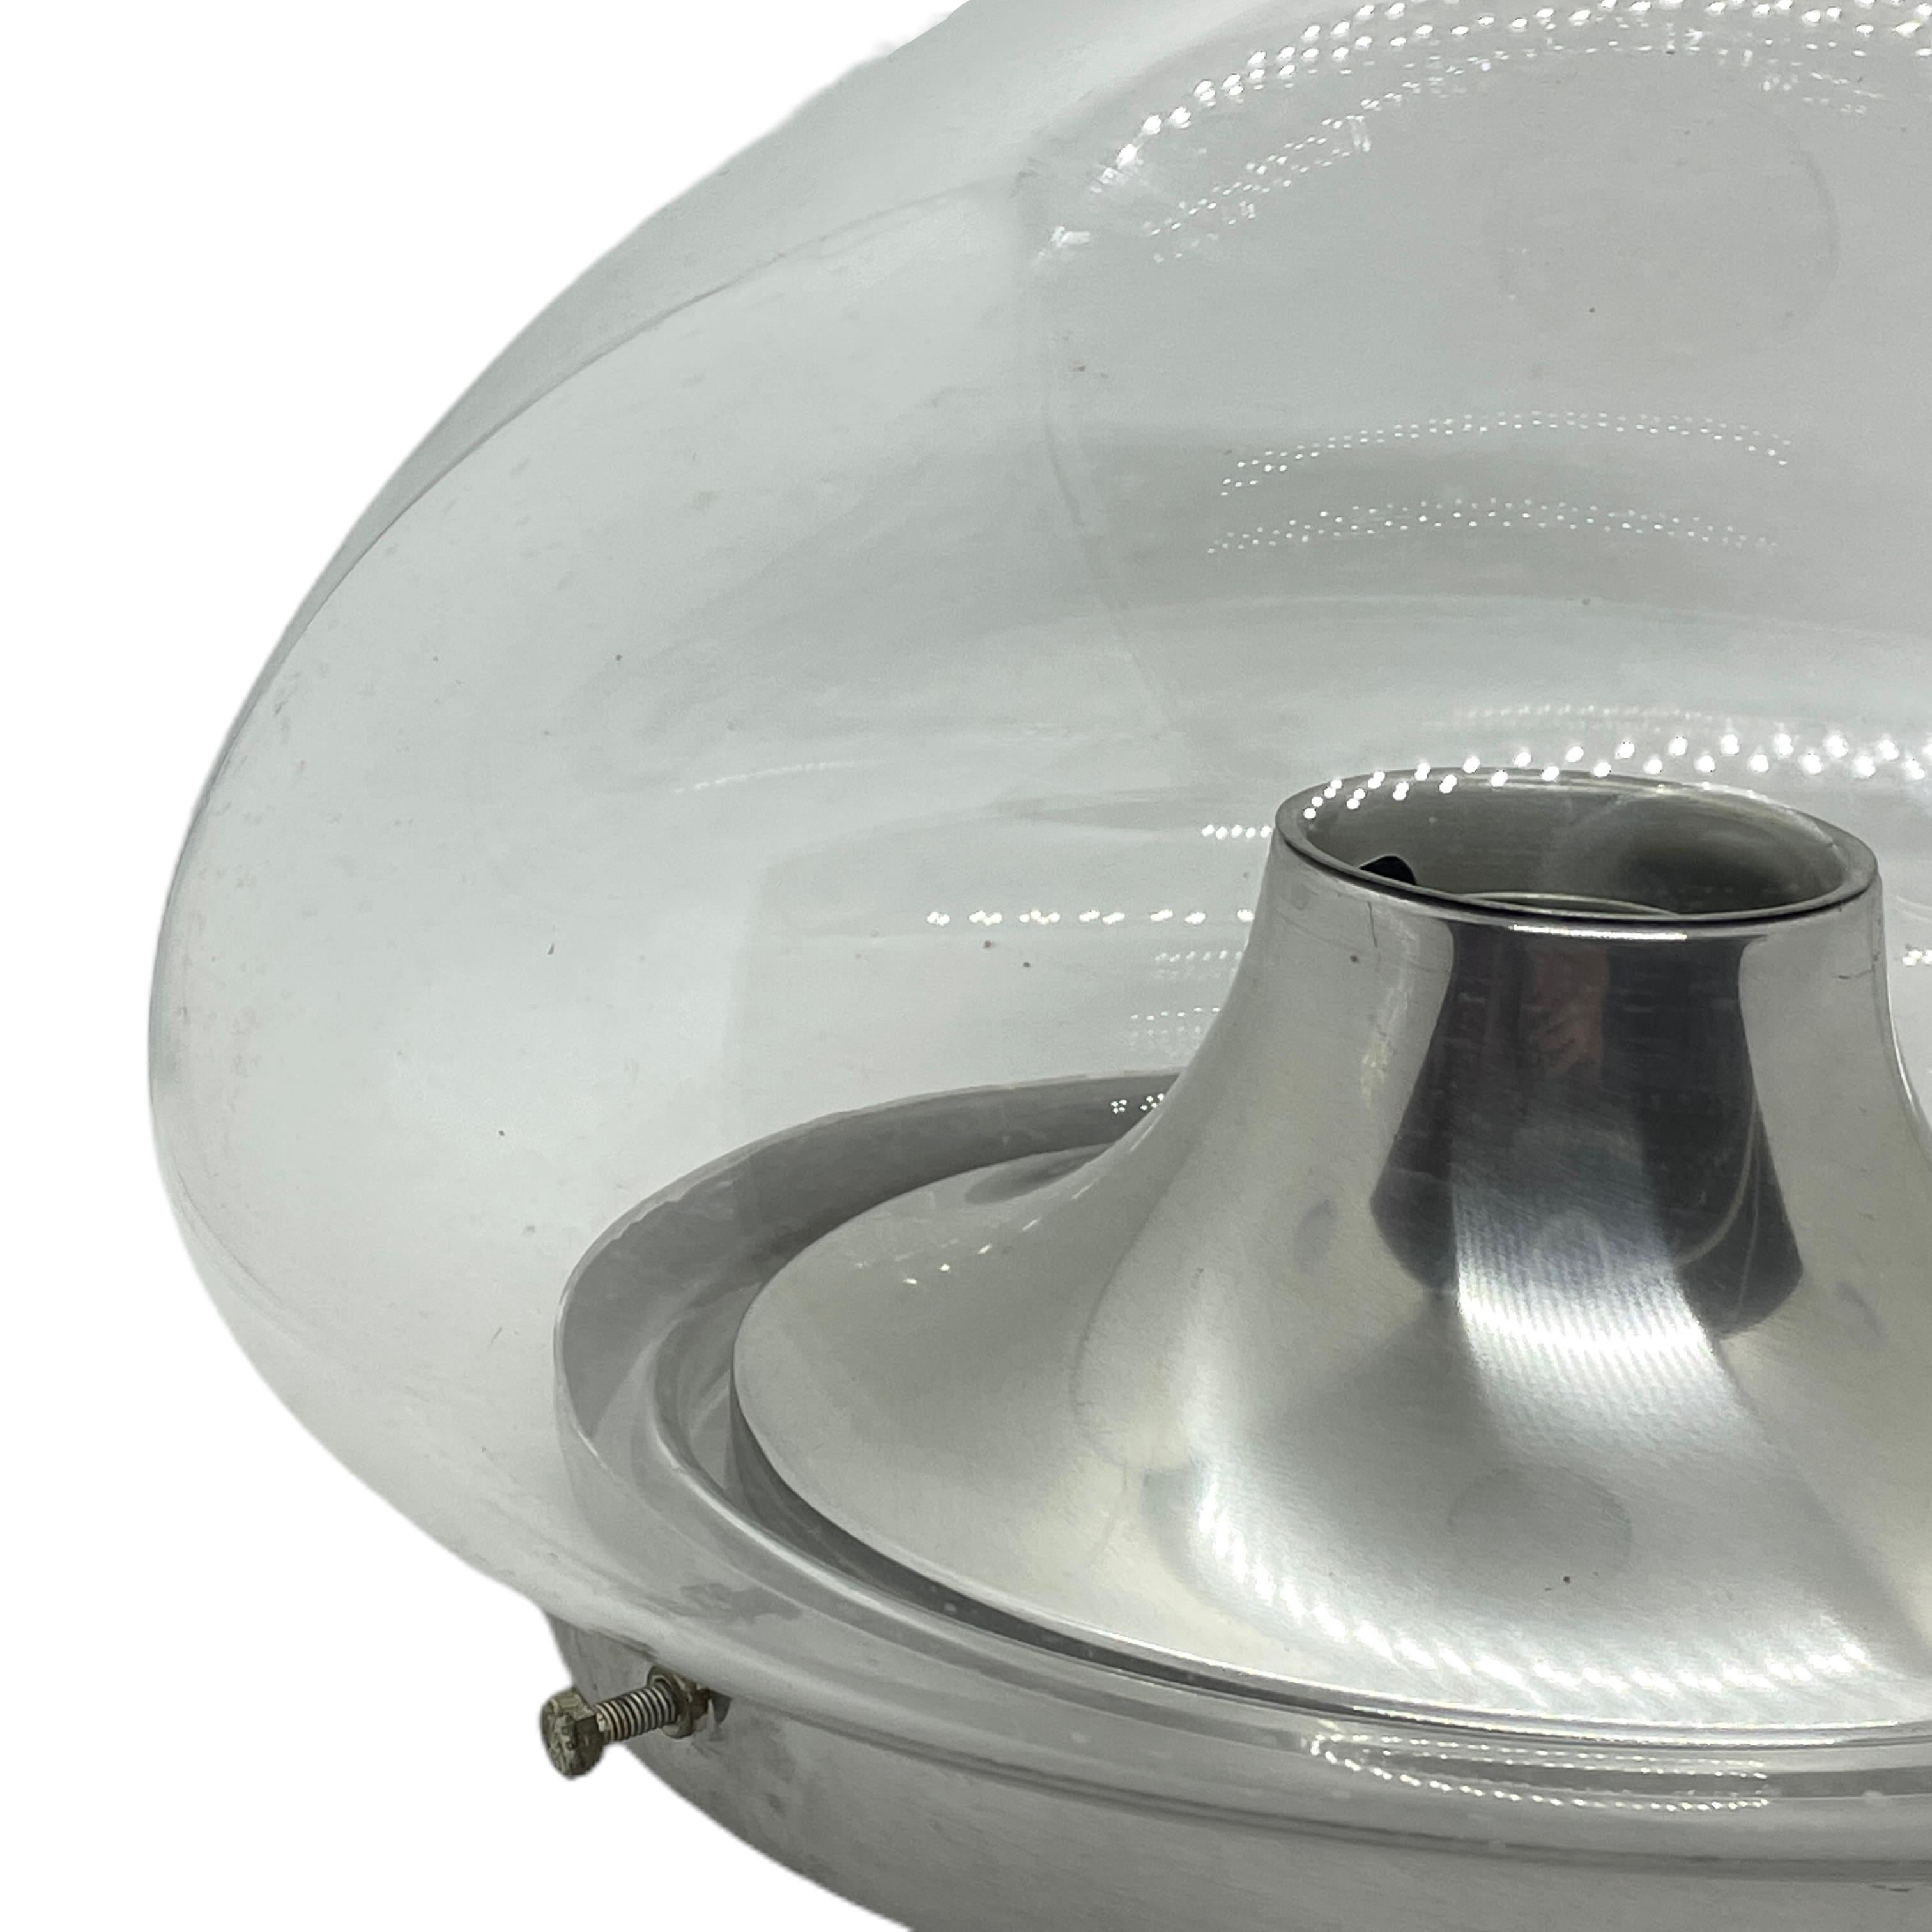 A beautiful flush mount by German manufacturer Doria Leuchten. The glass element is supported by a aluminum base plate with a one light source. Beautiful clear glass on a metal fixture. The Fixture requires one European E27 / 110 Volt Edison bulb,